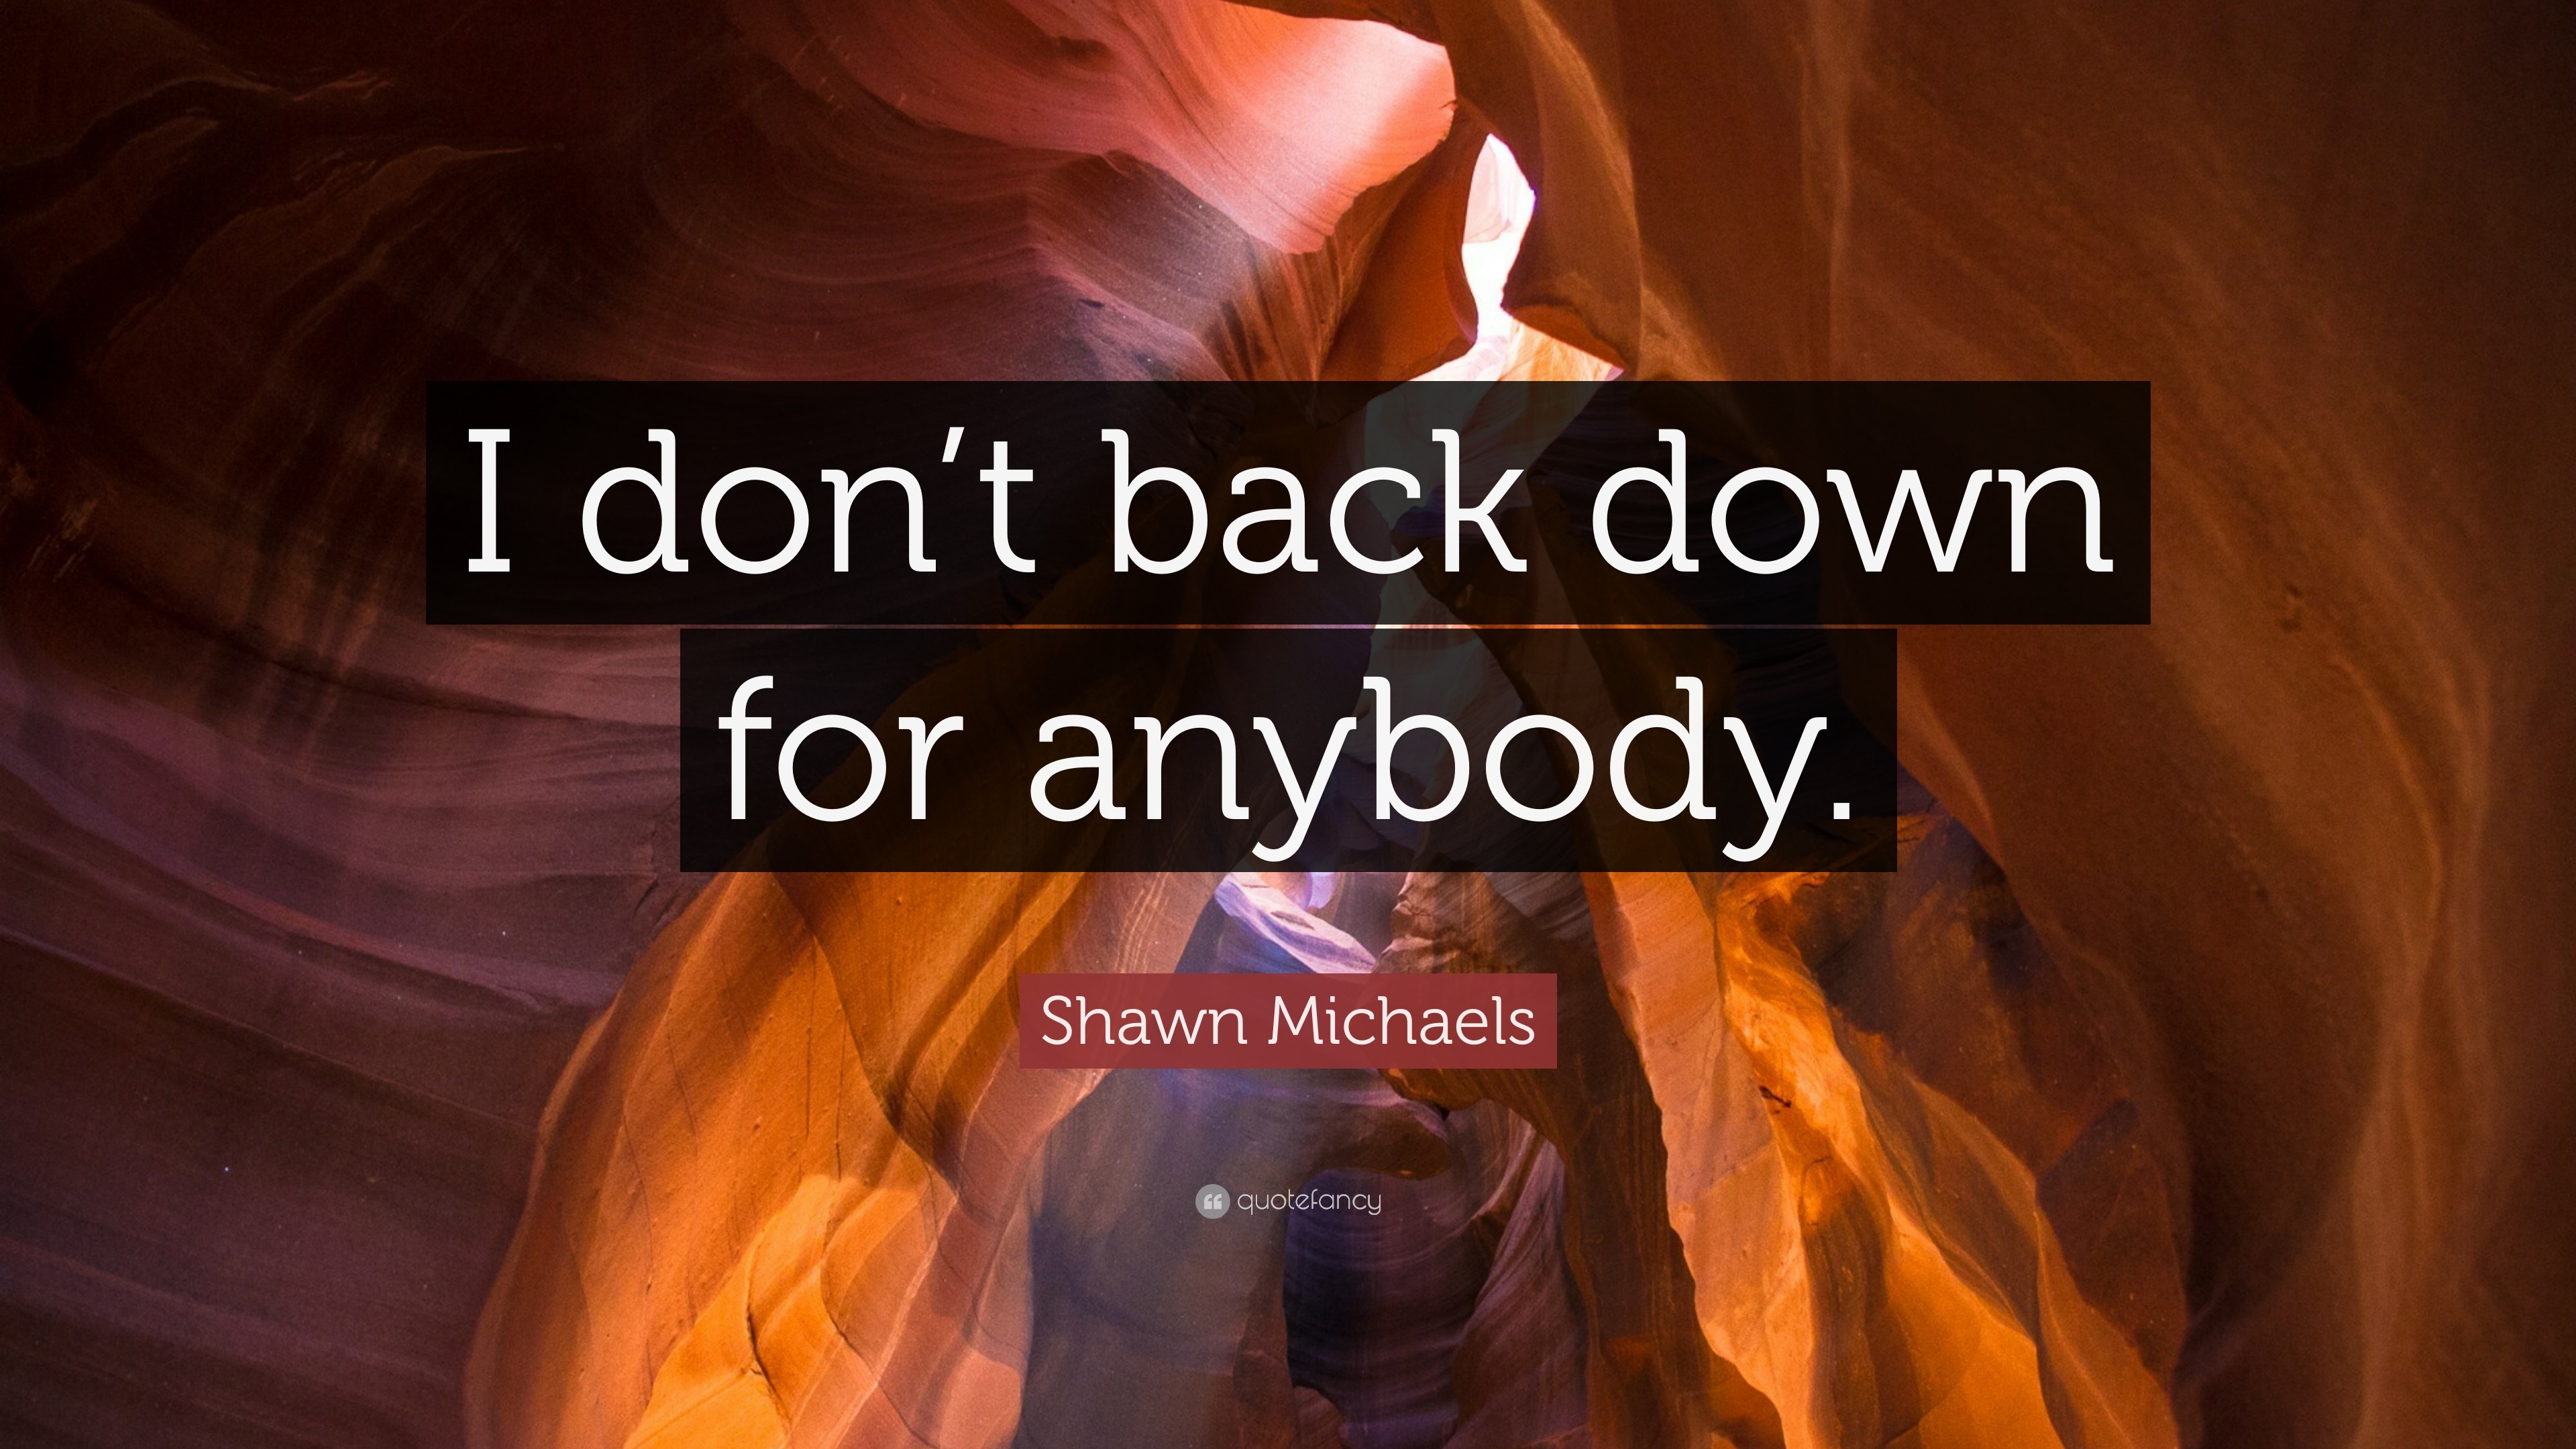 3840x2160 Shawn Michaels Quote: “I don't back down for anybody.”